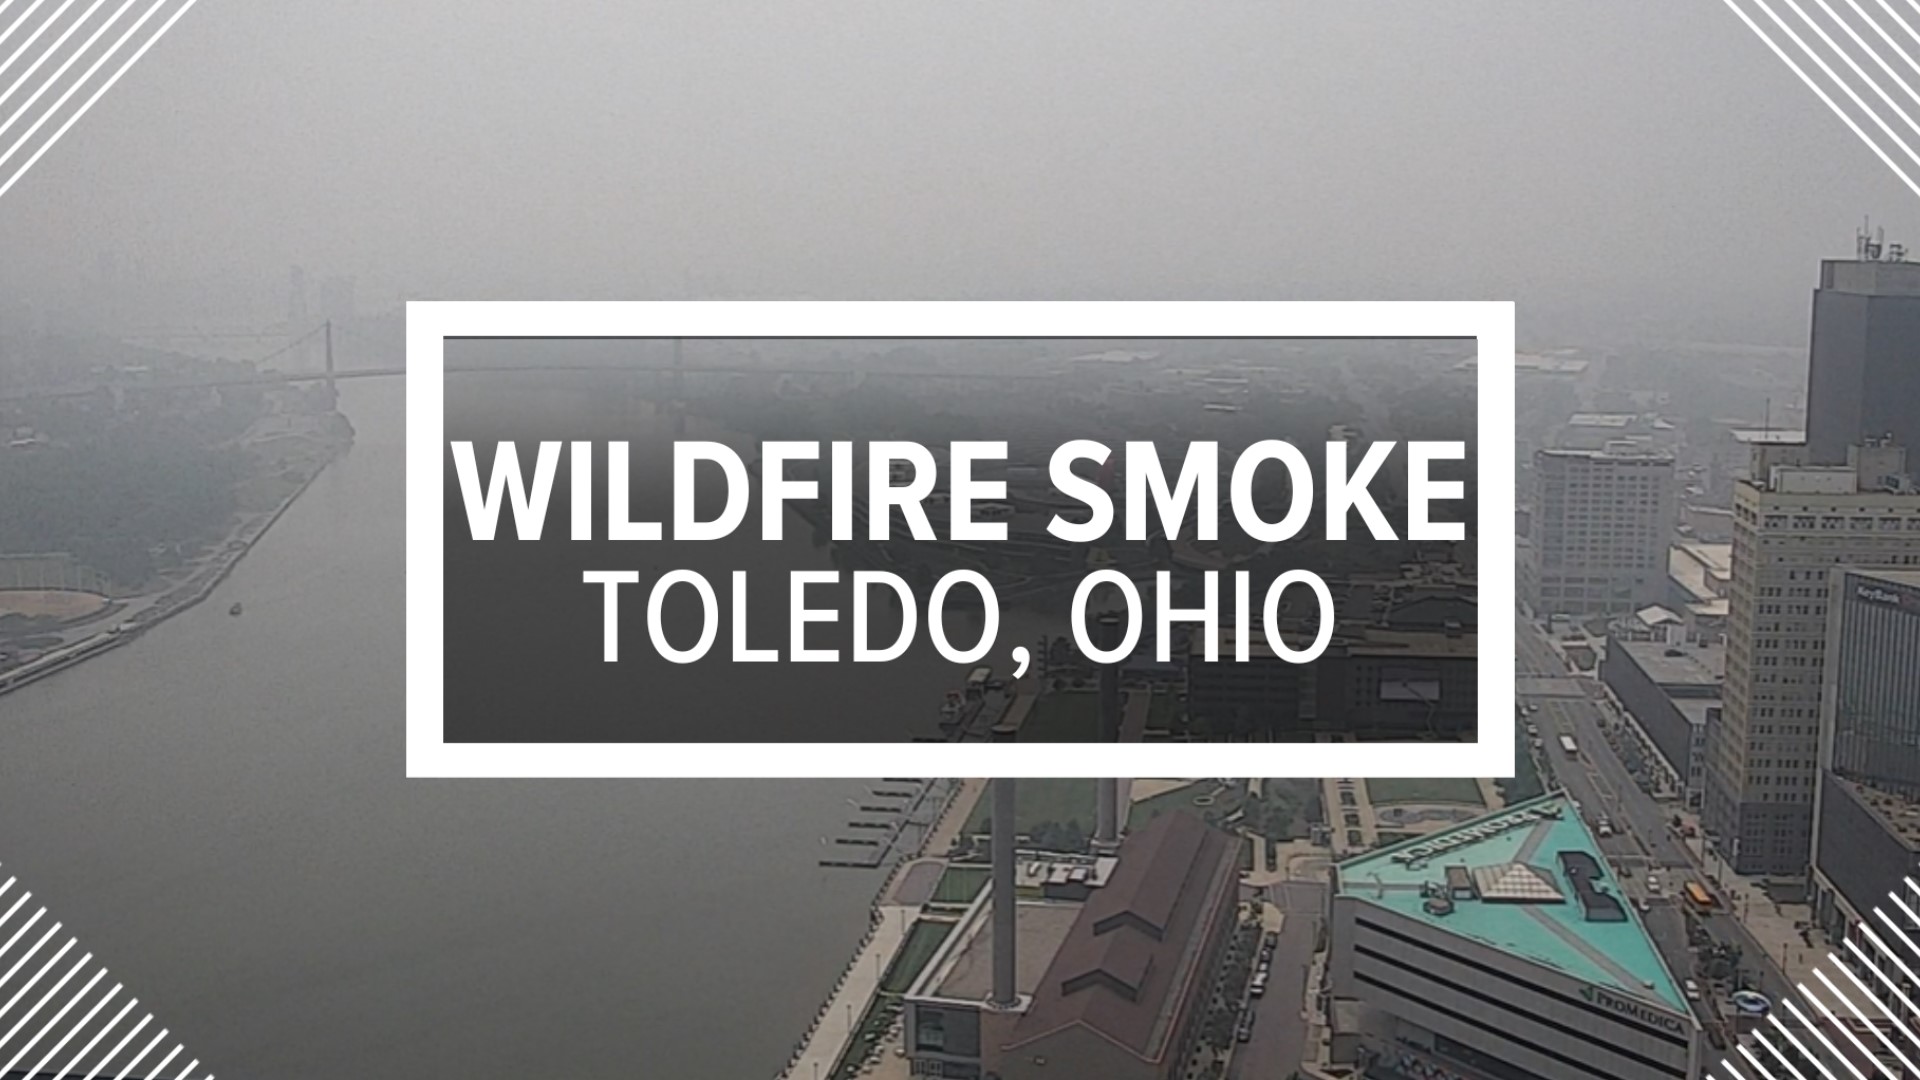 Northwest Ohio and southeast Michigan are under air quality warnings due to unhealthy smoke from Canadian wildfires settling over the region.